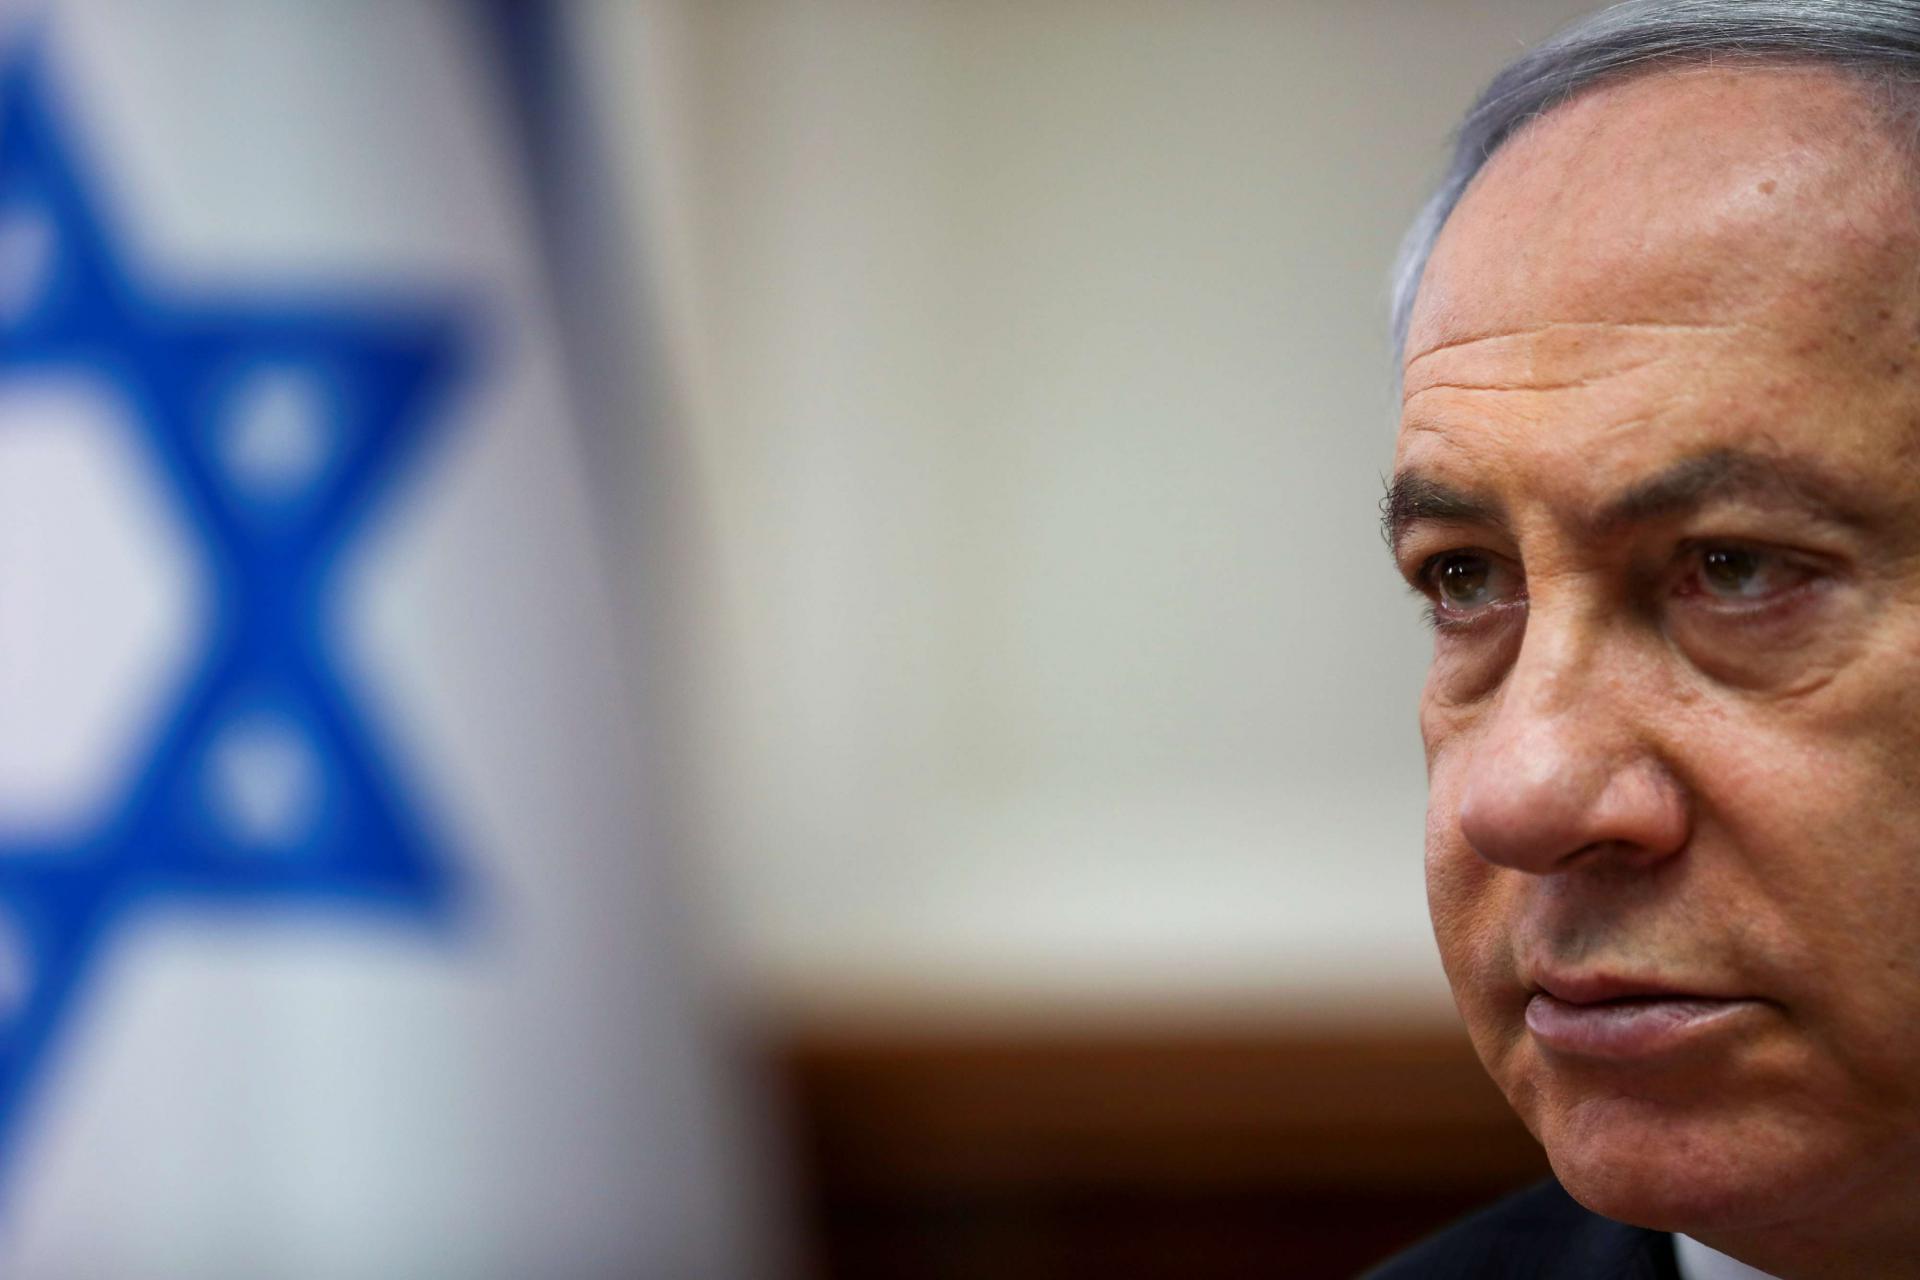 Netanyahu again appears to have a cohesive bloc behind him